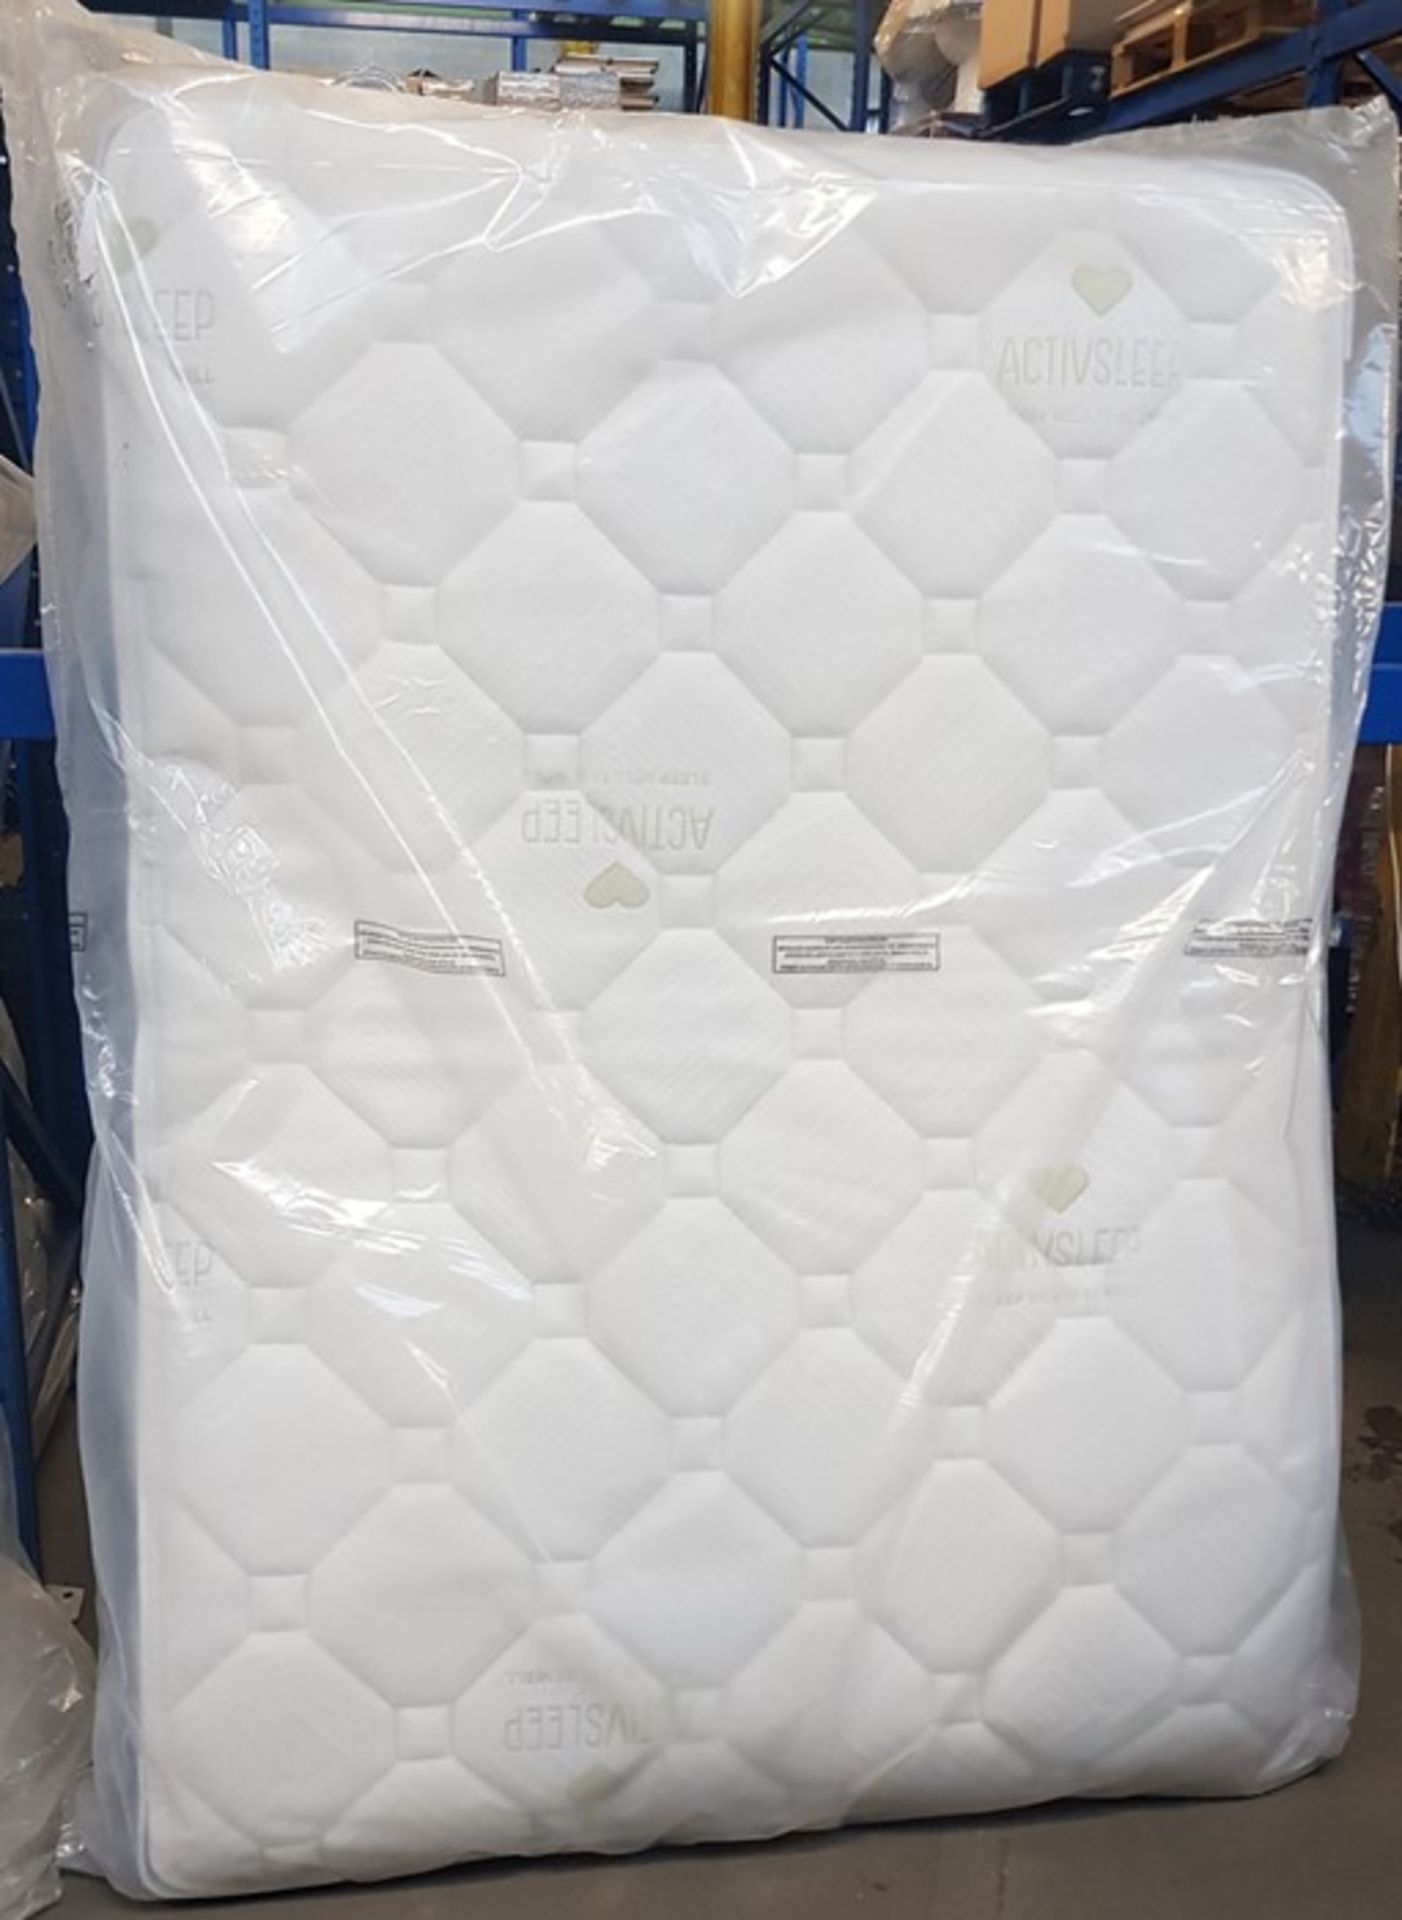 1 BAGGED ACTIVSLEEP BY SEALY 135CM DOUBLE POCKET SPRUNG MATTRESS / RRP £349.95 (PUBLIC VIEWING